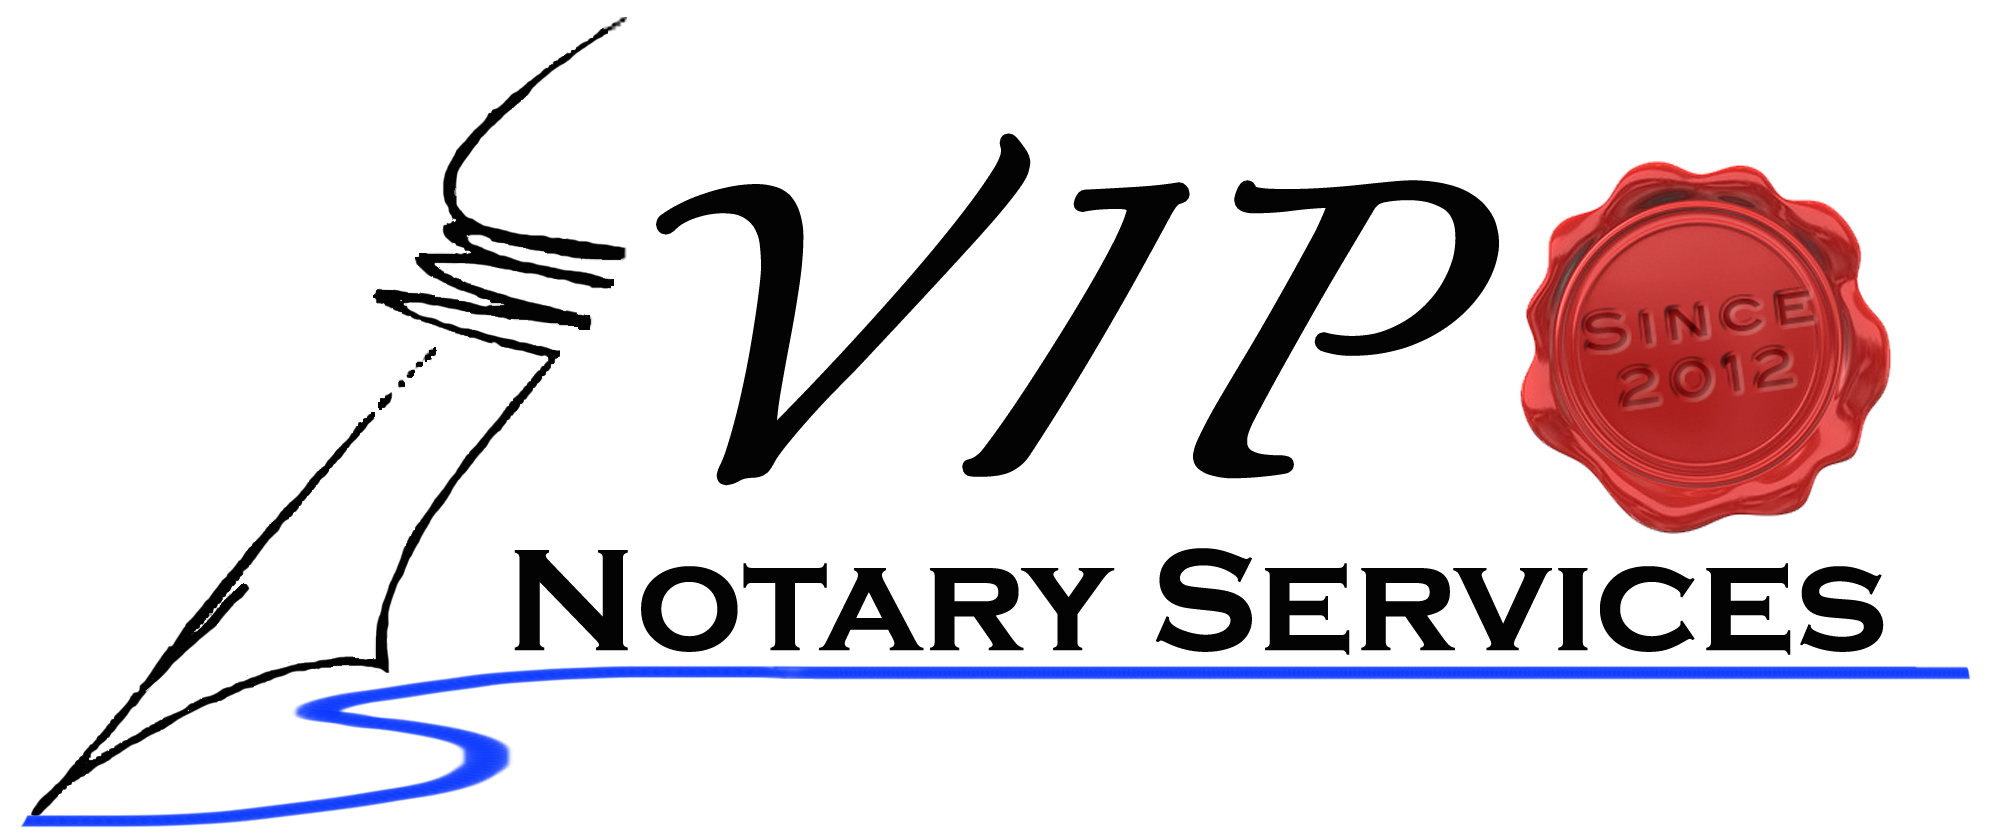 VIP Notary Services in Santa Monica - CA Certified Traveling Mobile Notary Public - Fully Bonded / Insured